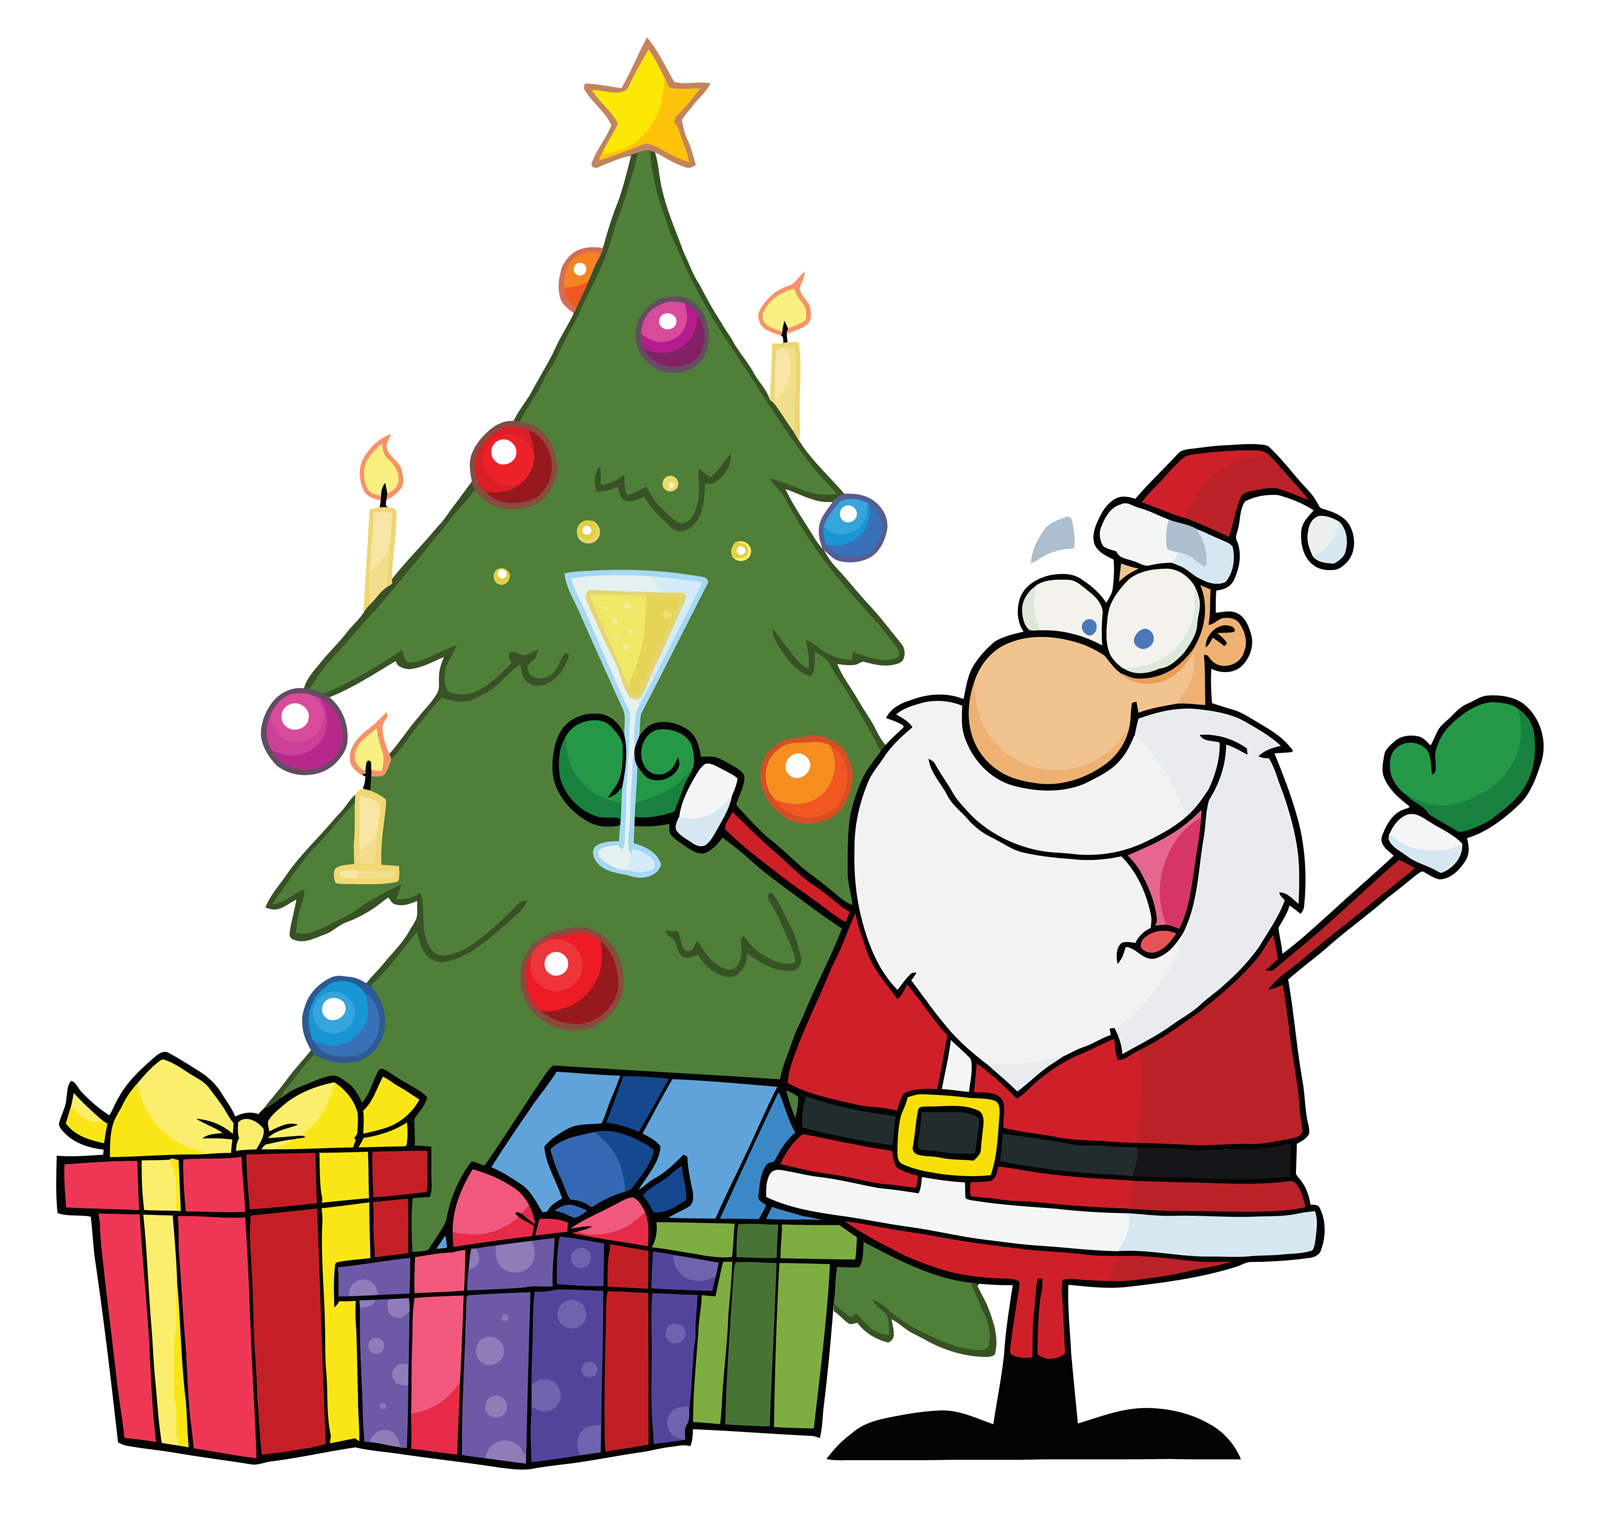 Clipart Christmas Tree With Presents   Clipart Panda   Free Clipart    